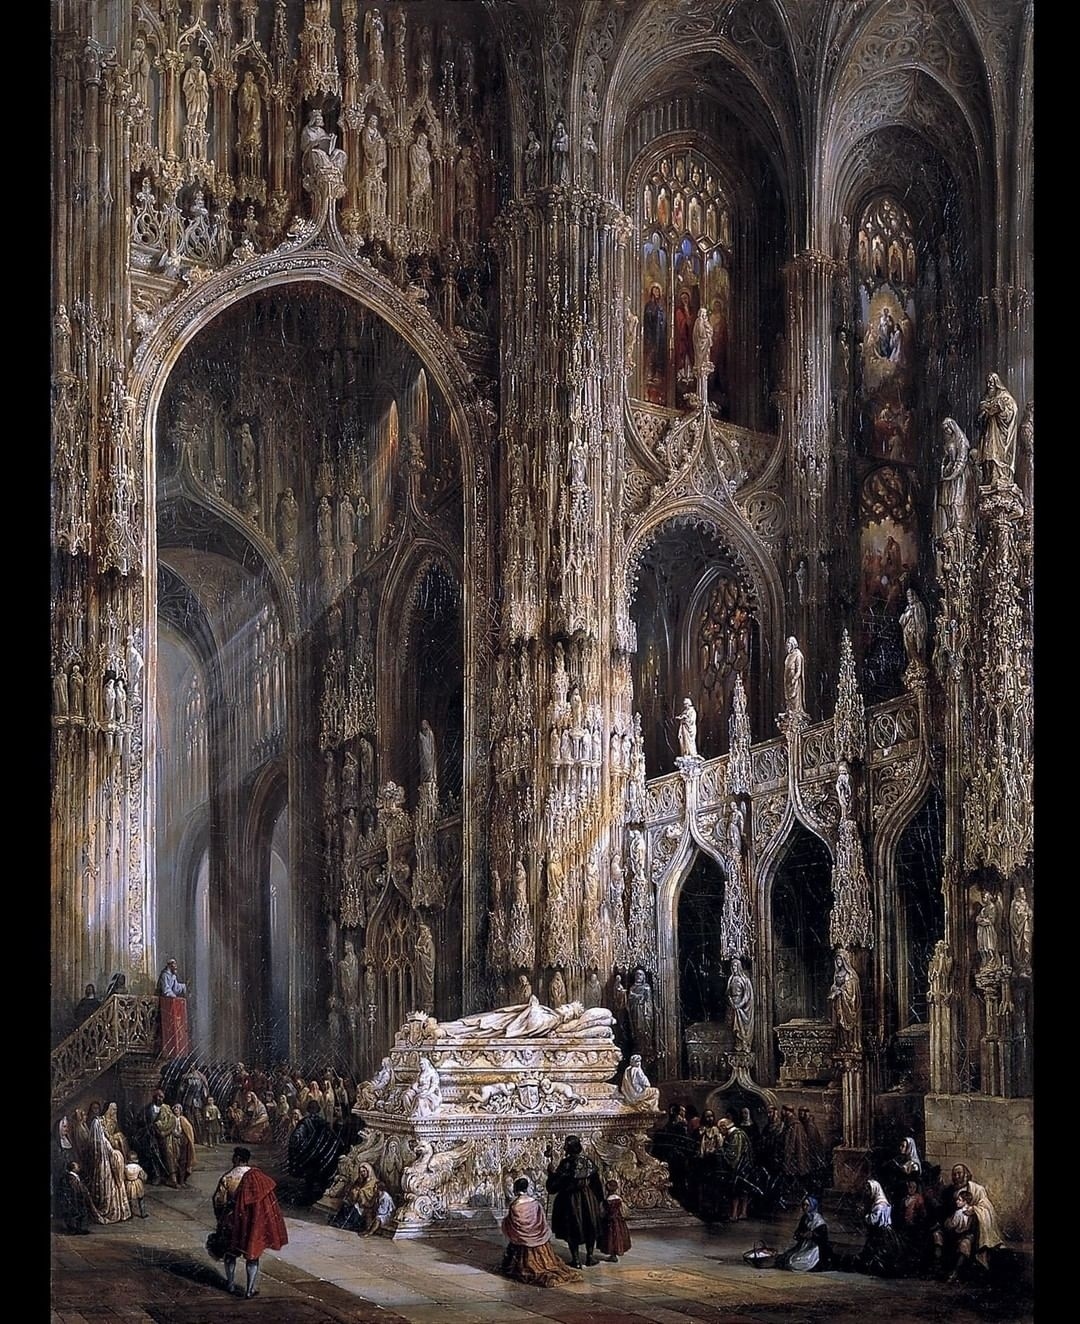 Oil on canvas, Jenaro Pérez Villaamil (1807–1854), View of the Interior of a Cathedral.